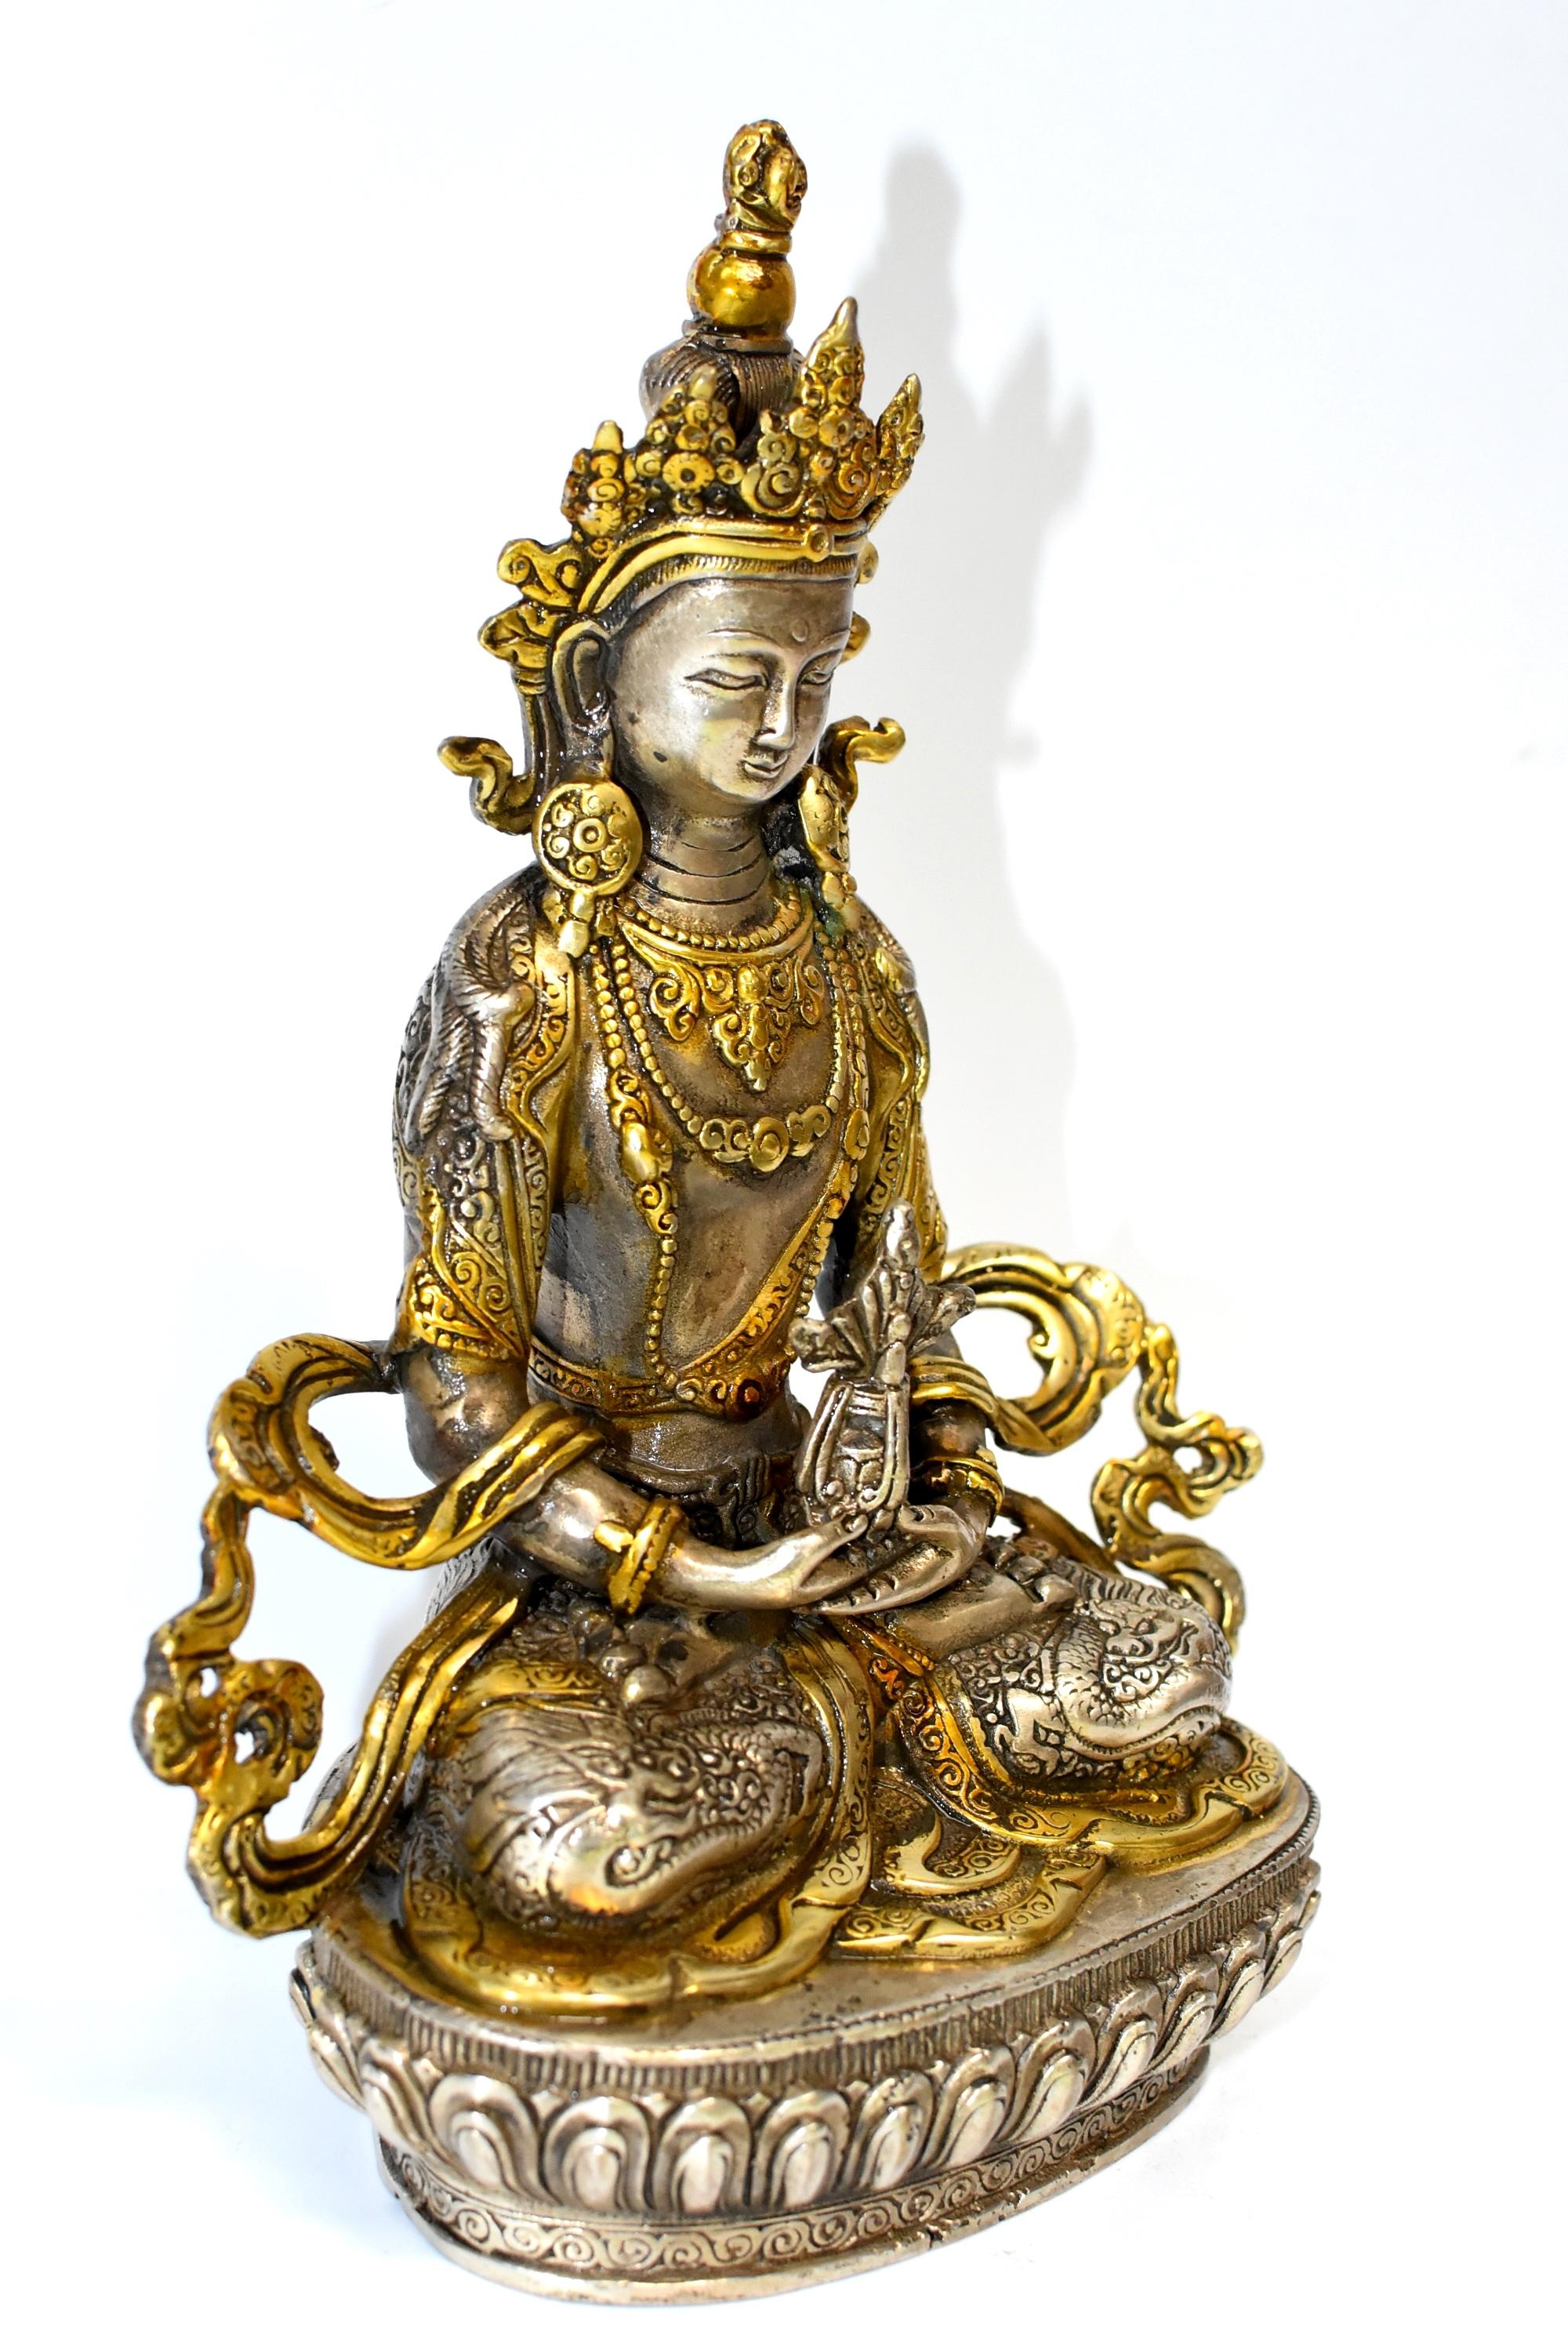 A beautiful statue of Tibetan Bodhisattva Amitayus. The god of longevity, he brings blessings of long life. In this statue he wears a high crown and an embossed skirt demonstrating lions and dragons. He holds the ambrosia vase which holds blessing